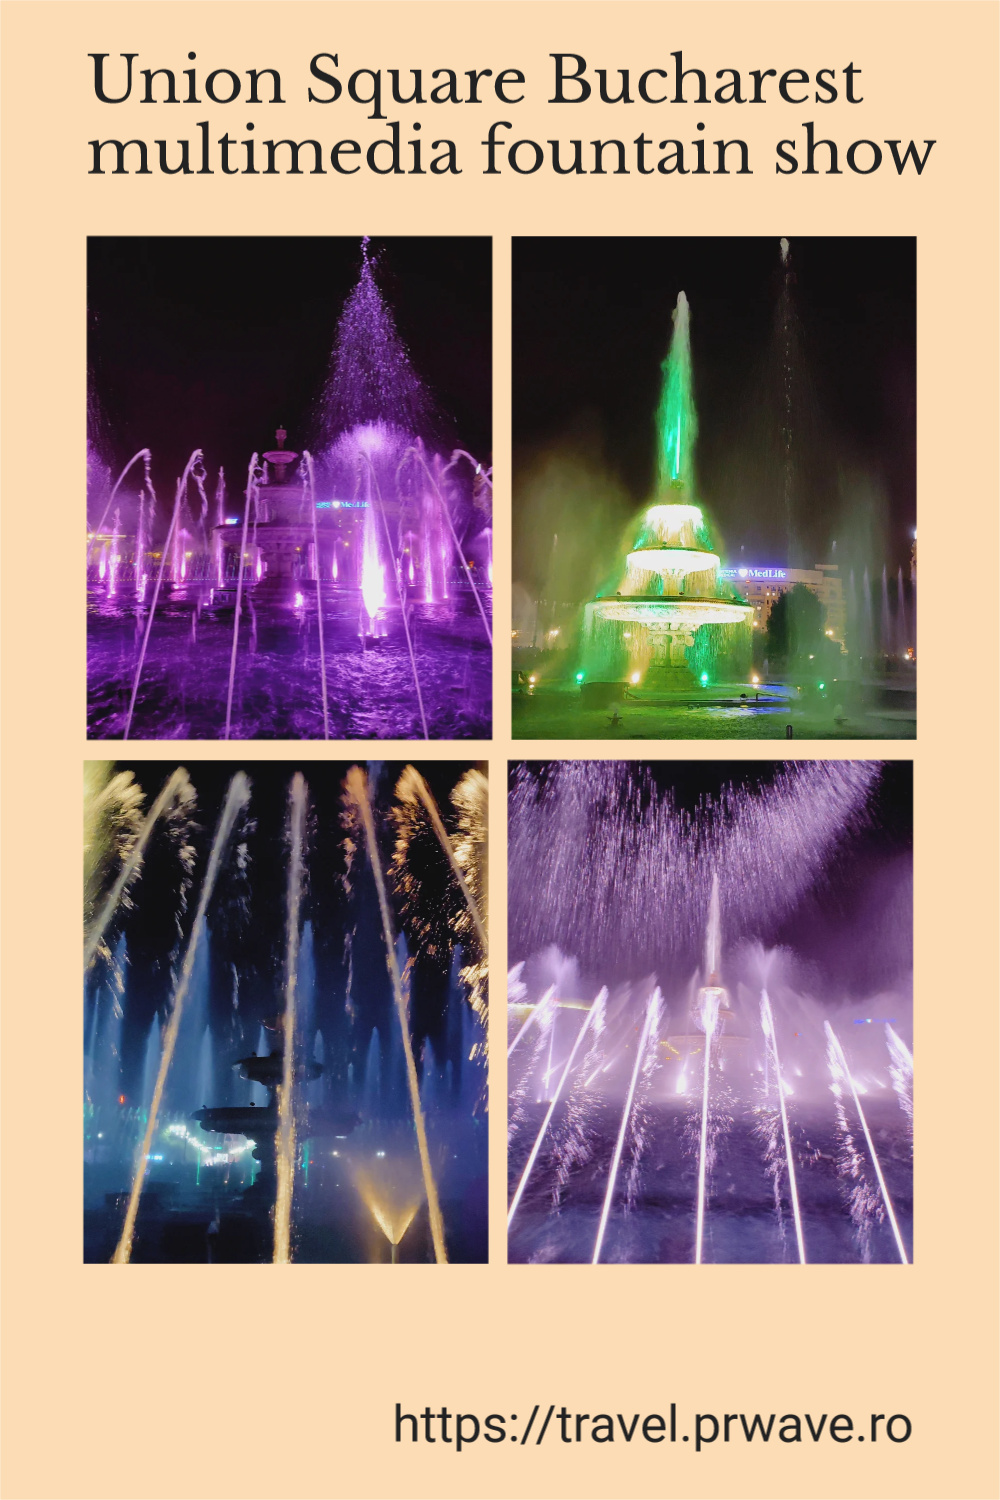 Magical fountain show - the singing fountains in Bucharest, Romania   #fountainshow #magicalshow #singingfountainshow #magicalfountainshow #bucharestfountains #bucharestfountainsshow